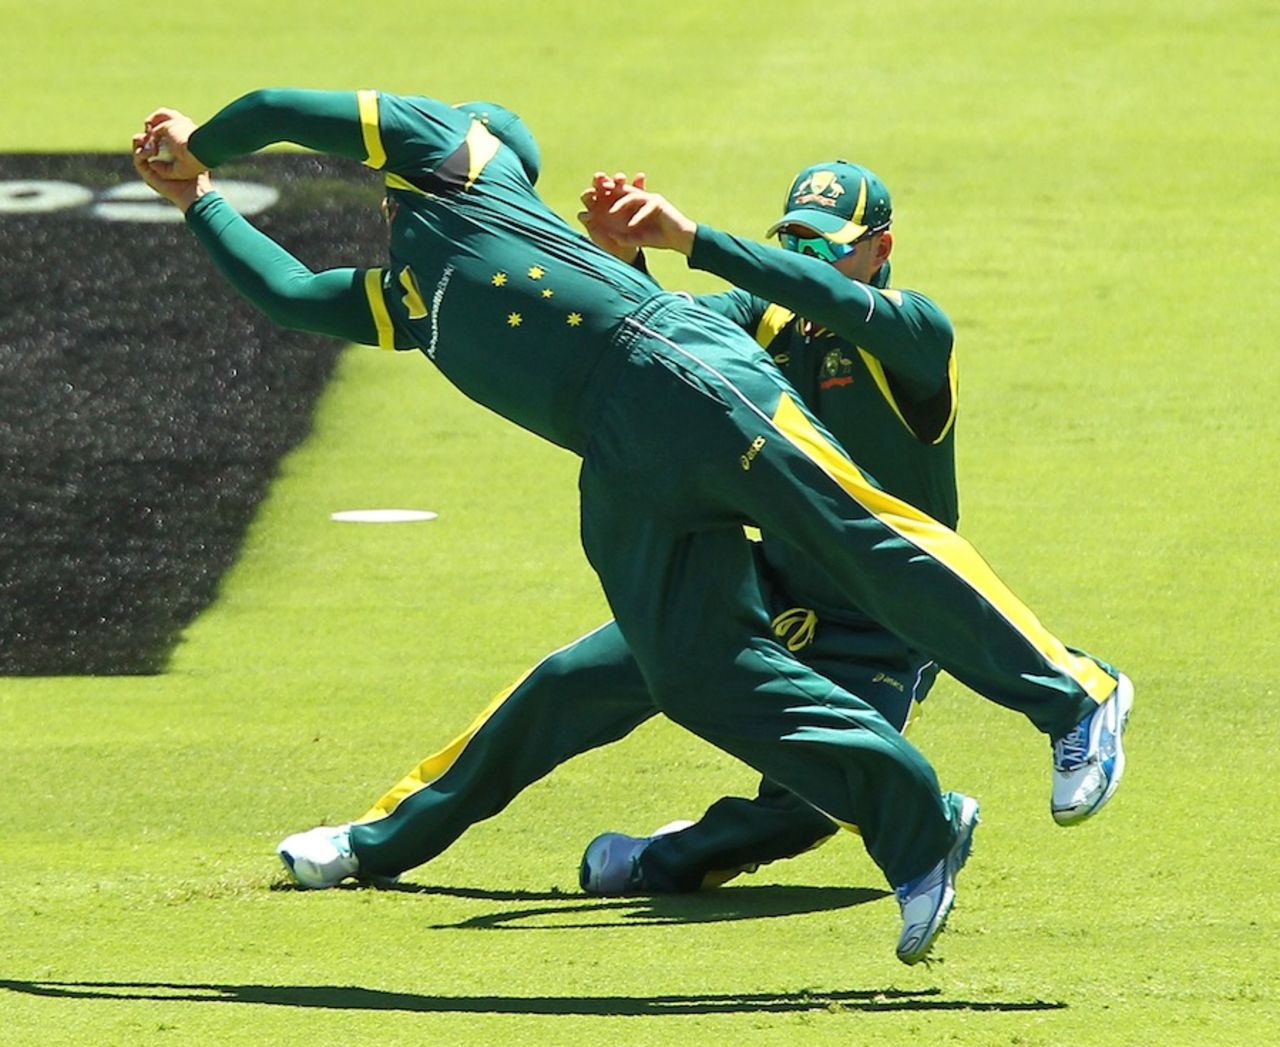 Aaron Finch dives across from second slip to take a catch, Australia v West Indies, 1st ODI, Perth, February 1, 2013